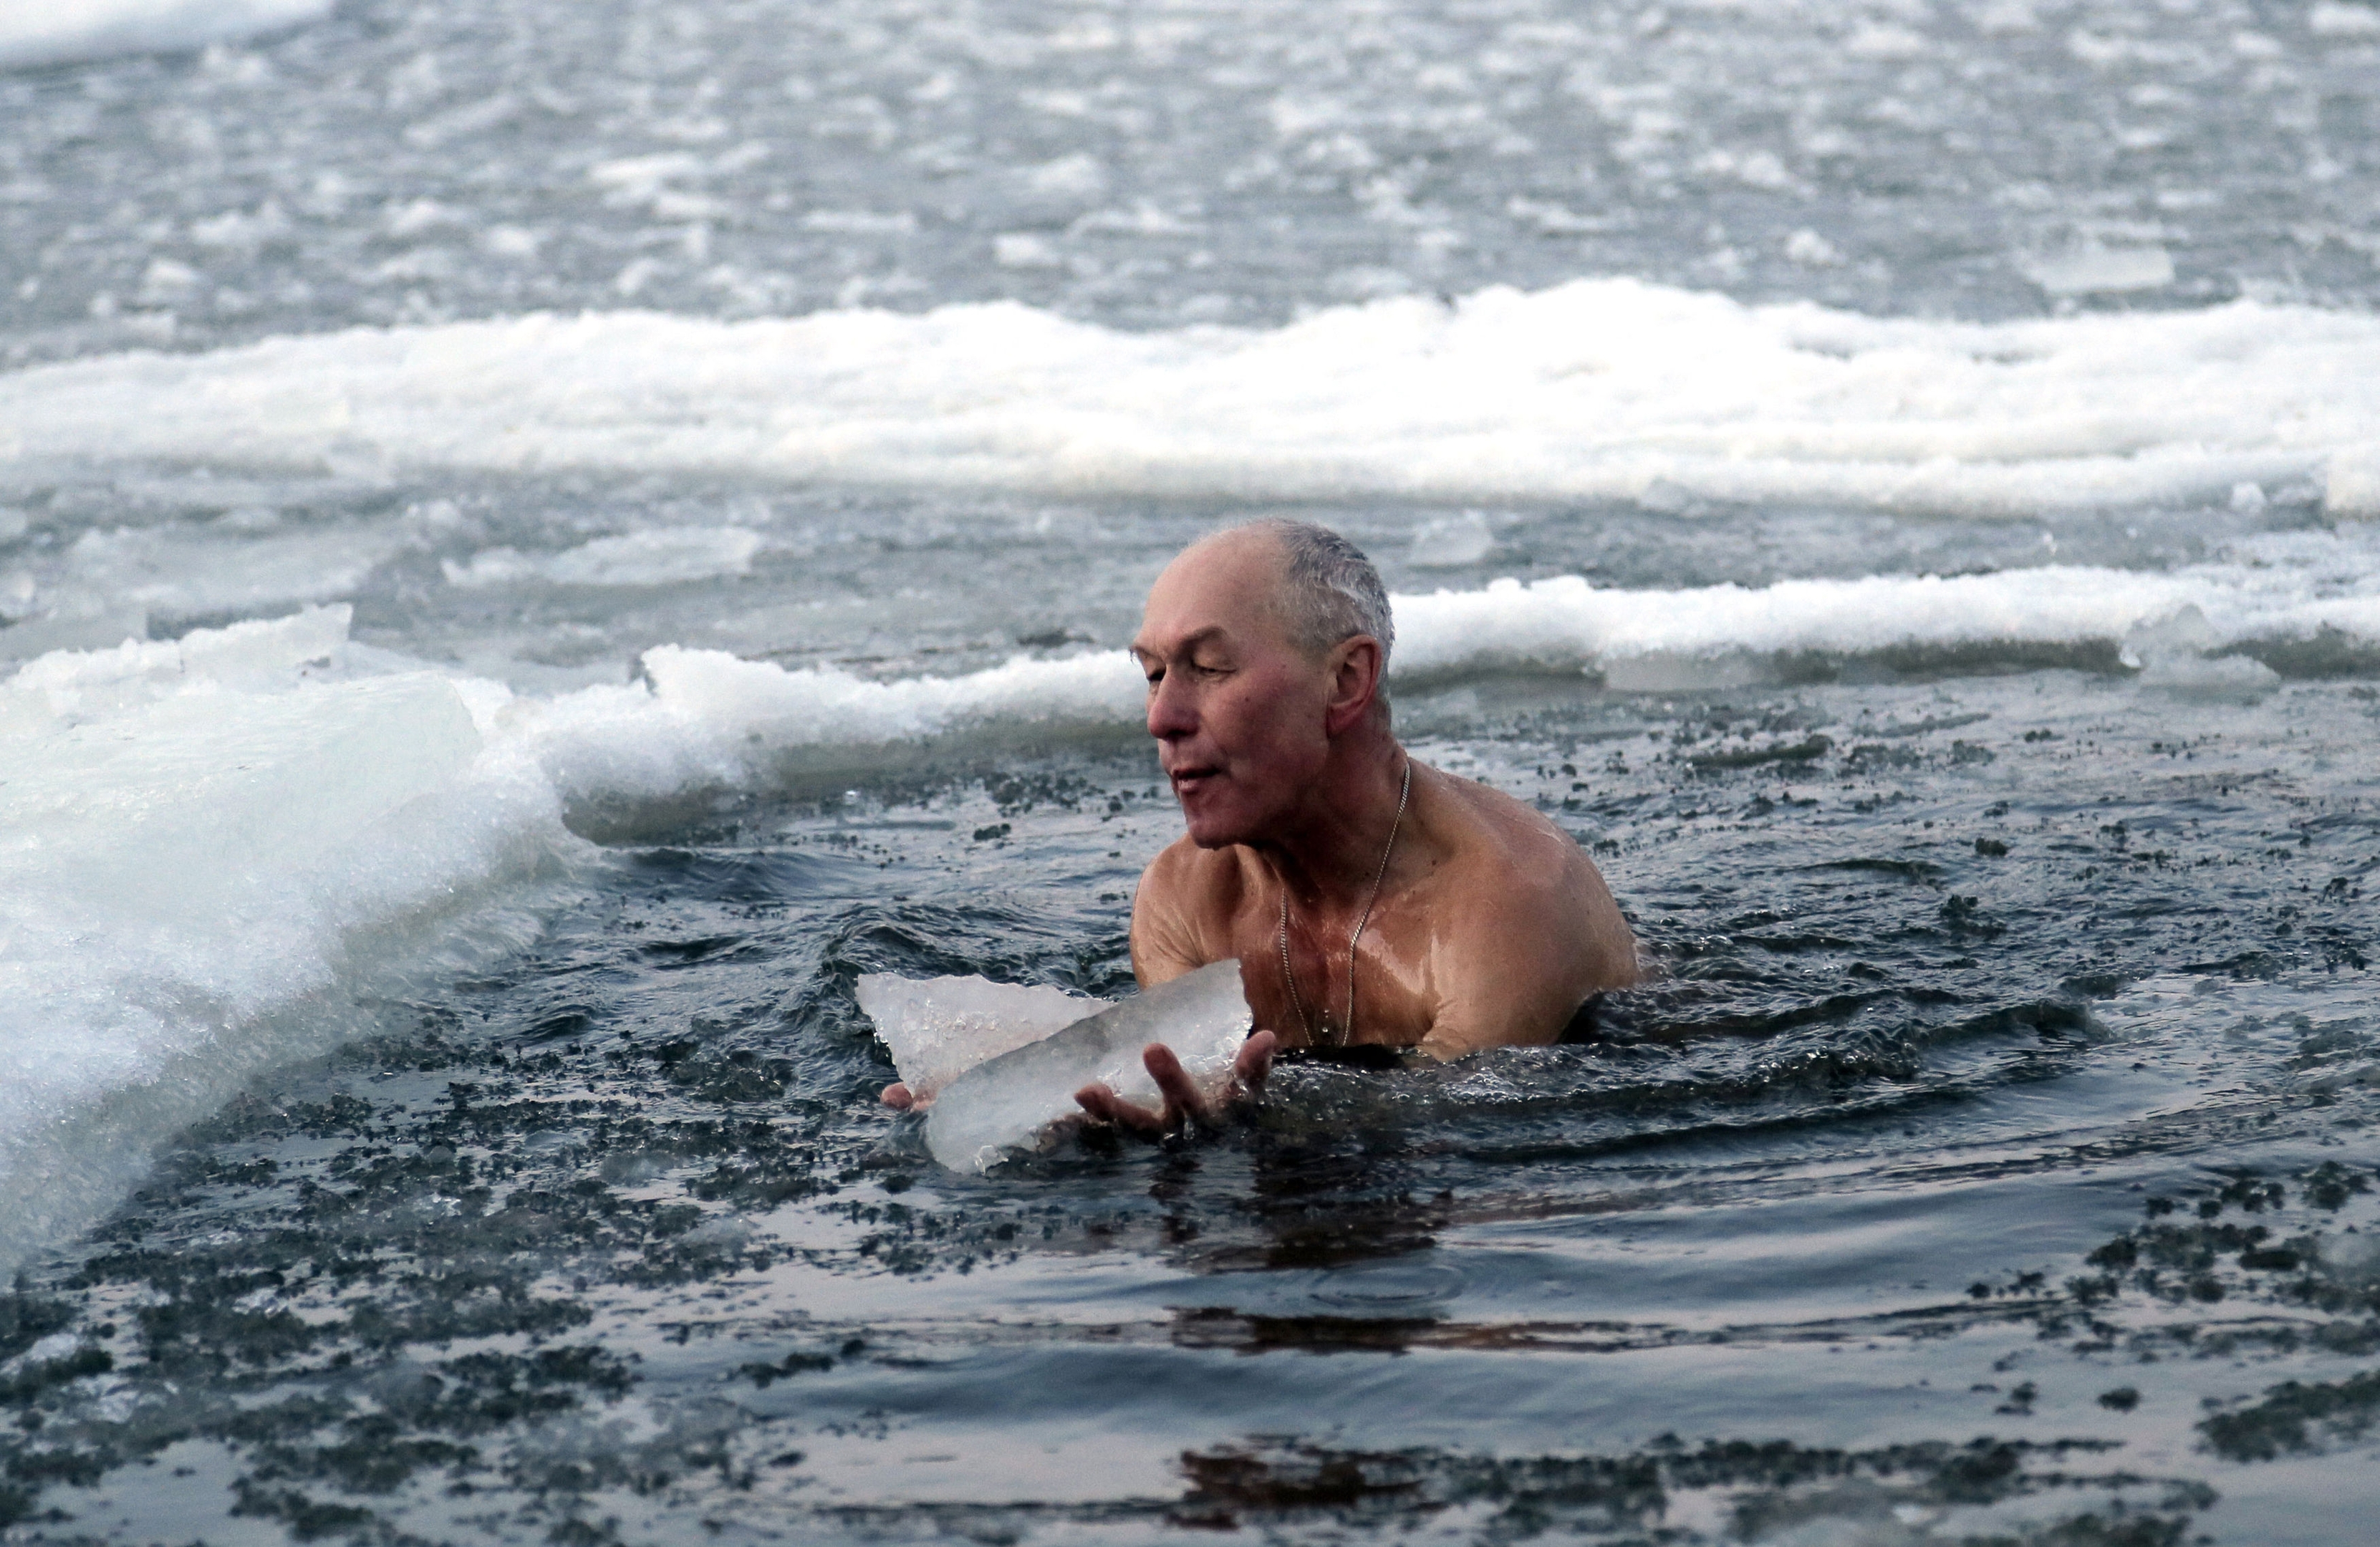 An Orthodox believer plunges in icy water during celebrations of the Epiphany in Kiev, Ukraine, Tuesday, Jan. 19, 2016. Orthodox believers celebrate the holiday of the Epiphany on Jan. 19, and traditionally bathe in holes cut through thick ice on rivers and ponds to cleanse themselves with water deemed holy for the day. (AP Photo/Efrem Lukatsky)